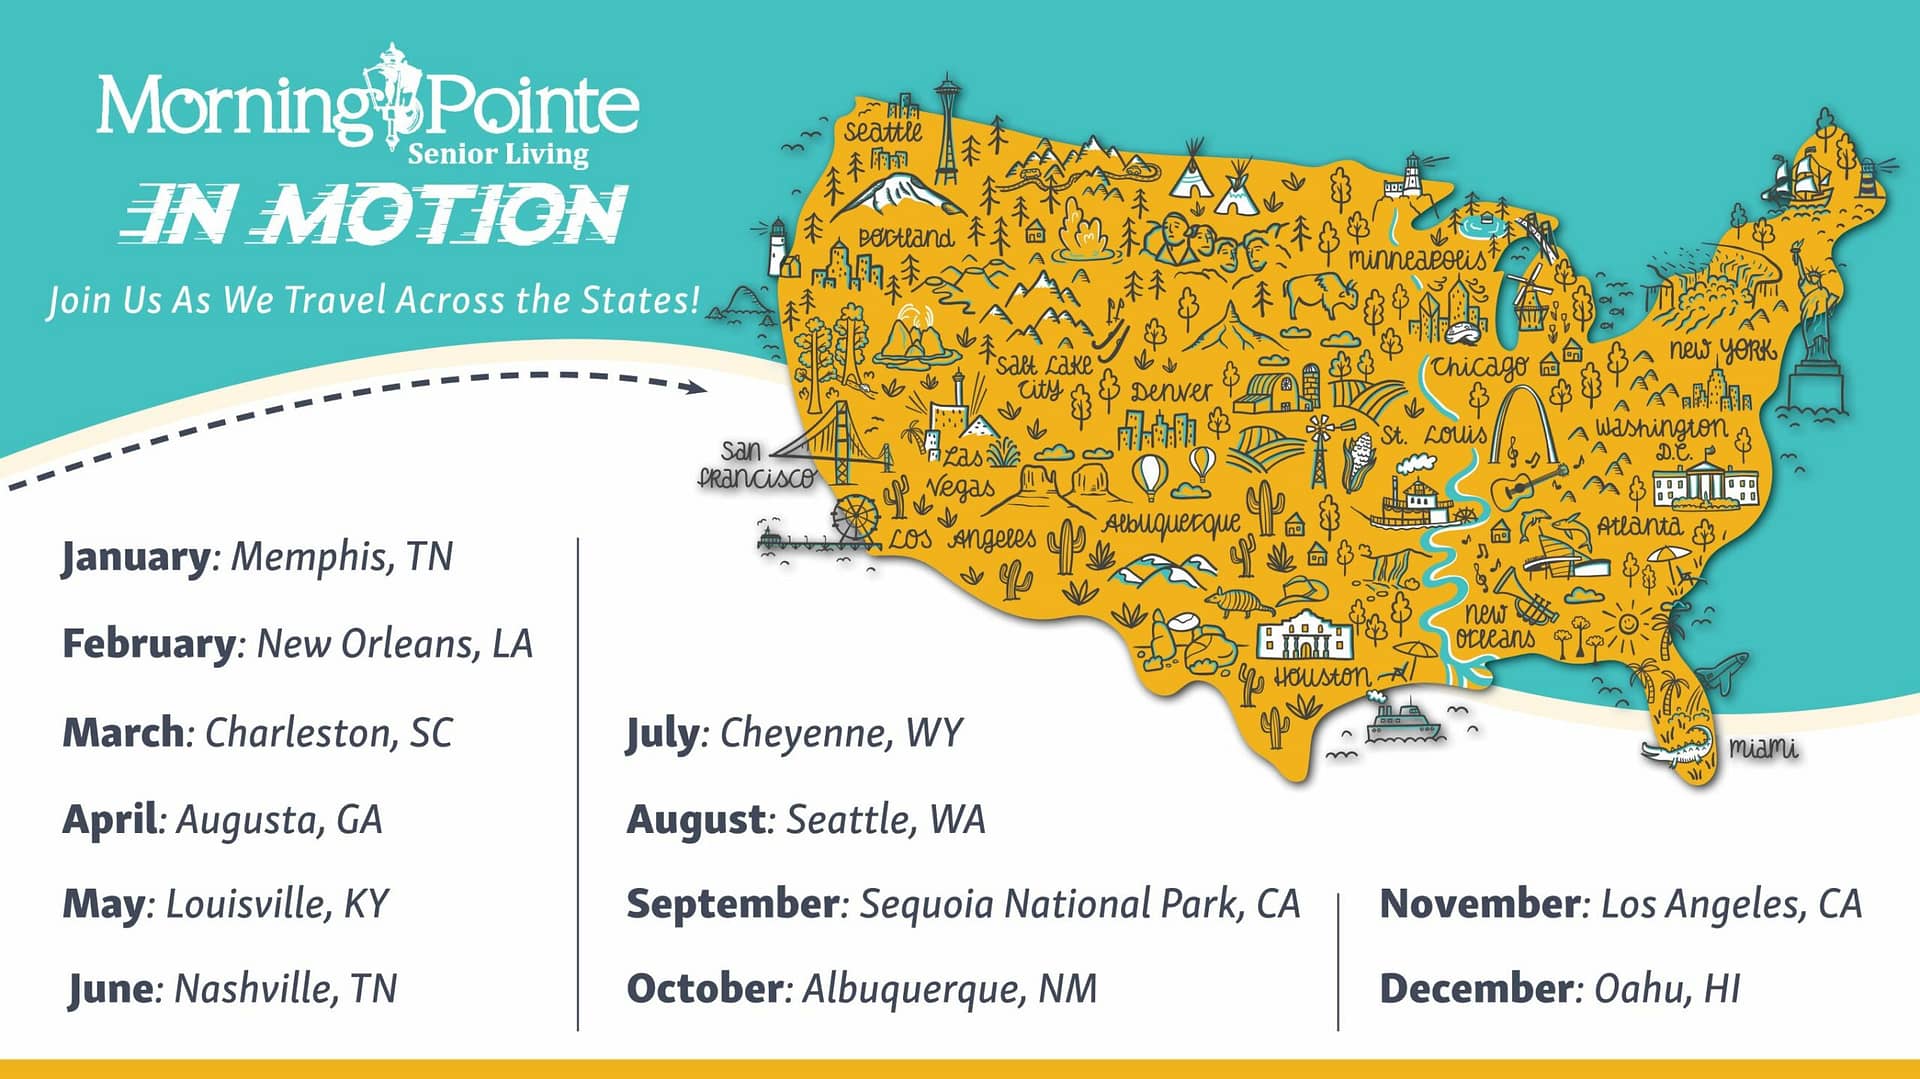 Morning Pointe in Motion full year image